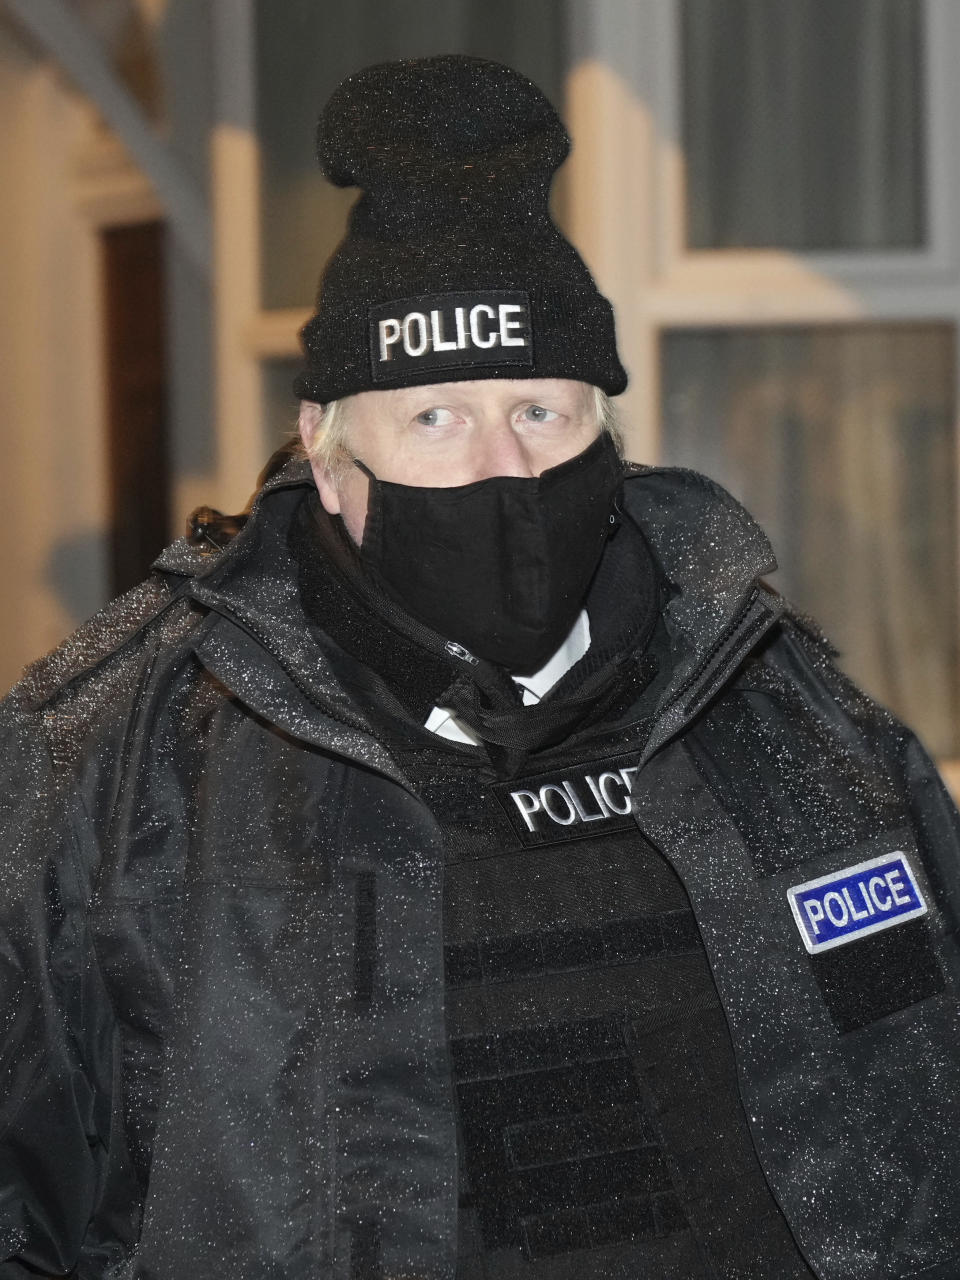 Britain's Prime Minister Boris Johnson observes an early morning police raid on a home in Liverpool, England, Monday Dec, 6, 2021, ahead of the publication of the government's 10-year drug strategy. (Christopher Furlong/Pool via AP)